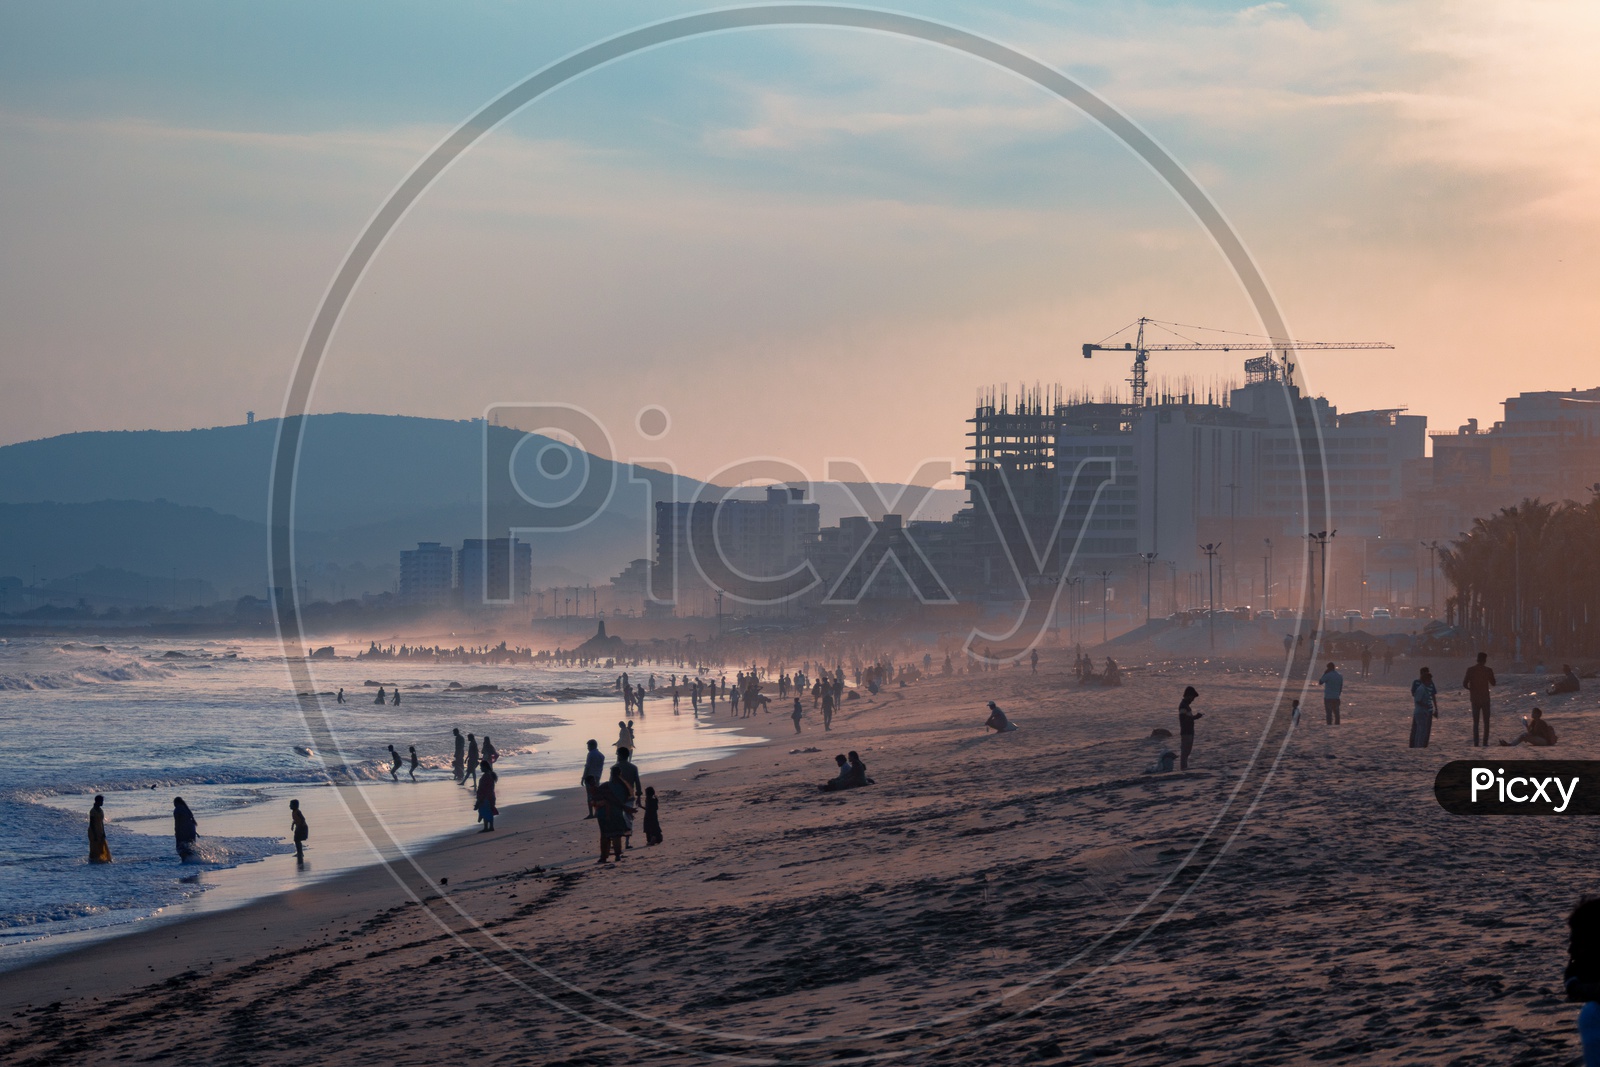 Vizag Beach Beach With Visitors in an Evening Light